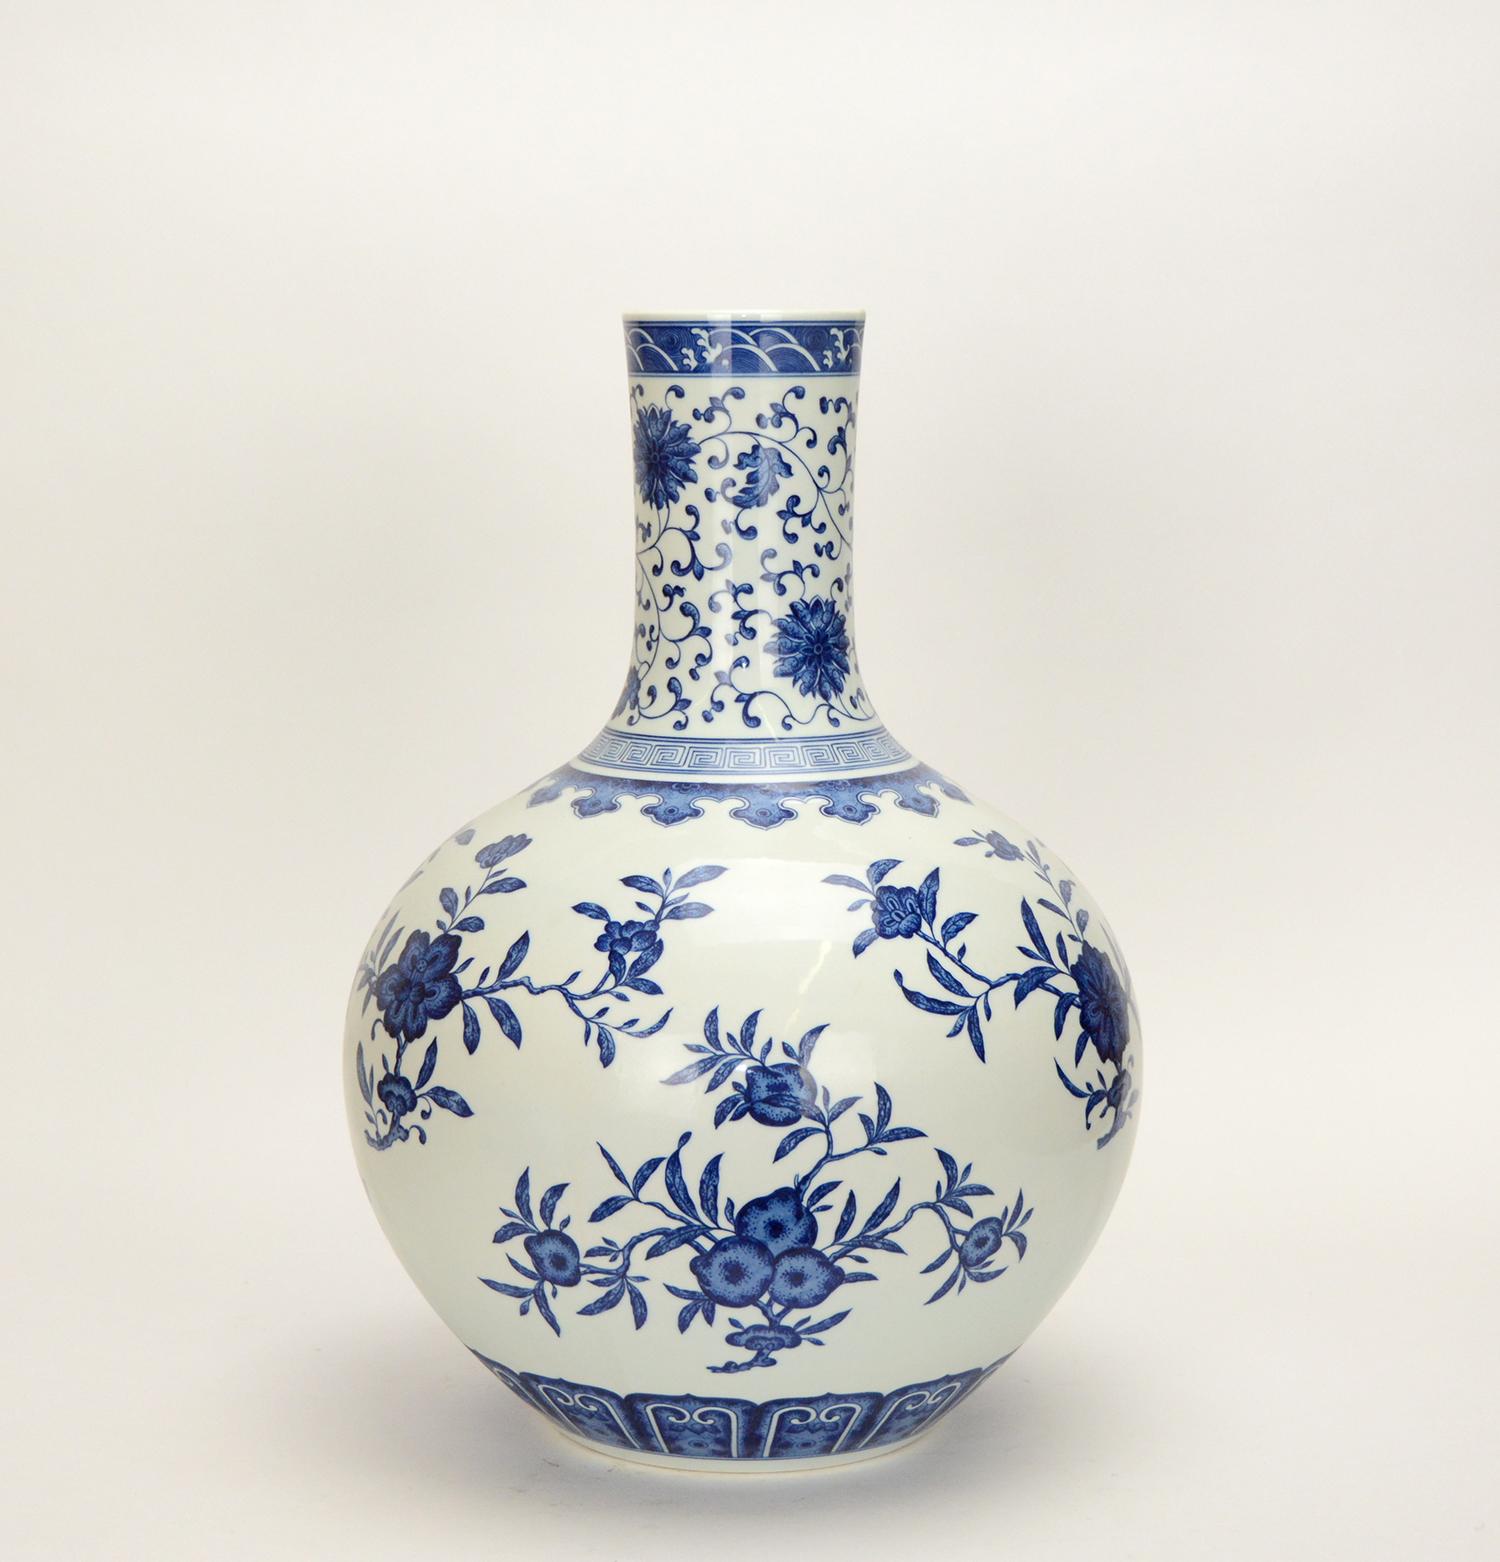 A beautiful hand painted Chinese porcelain vase with blue and white flowers. A fine example of Chinese Qing Qianlong style vase. Underneath it has a 6 character Chinese seal marking. This vase measures 19 inch tall.